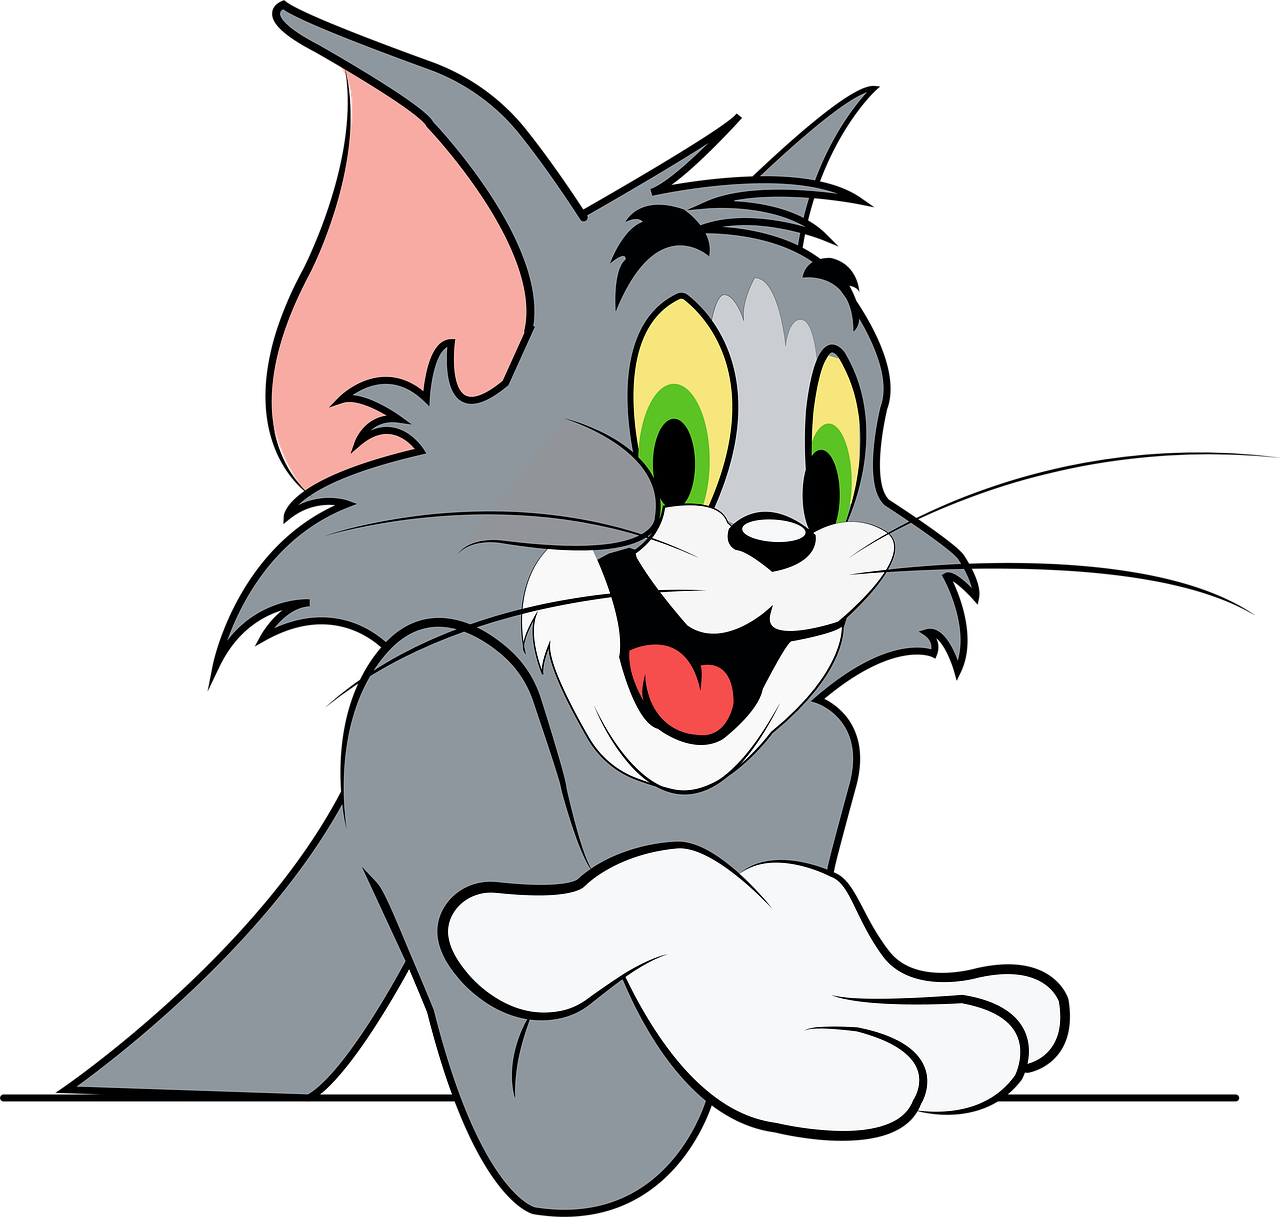 Tom and Jerry. Кот том и Джерри. Tom from Tom and Jerry.